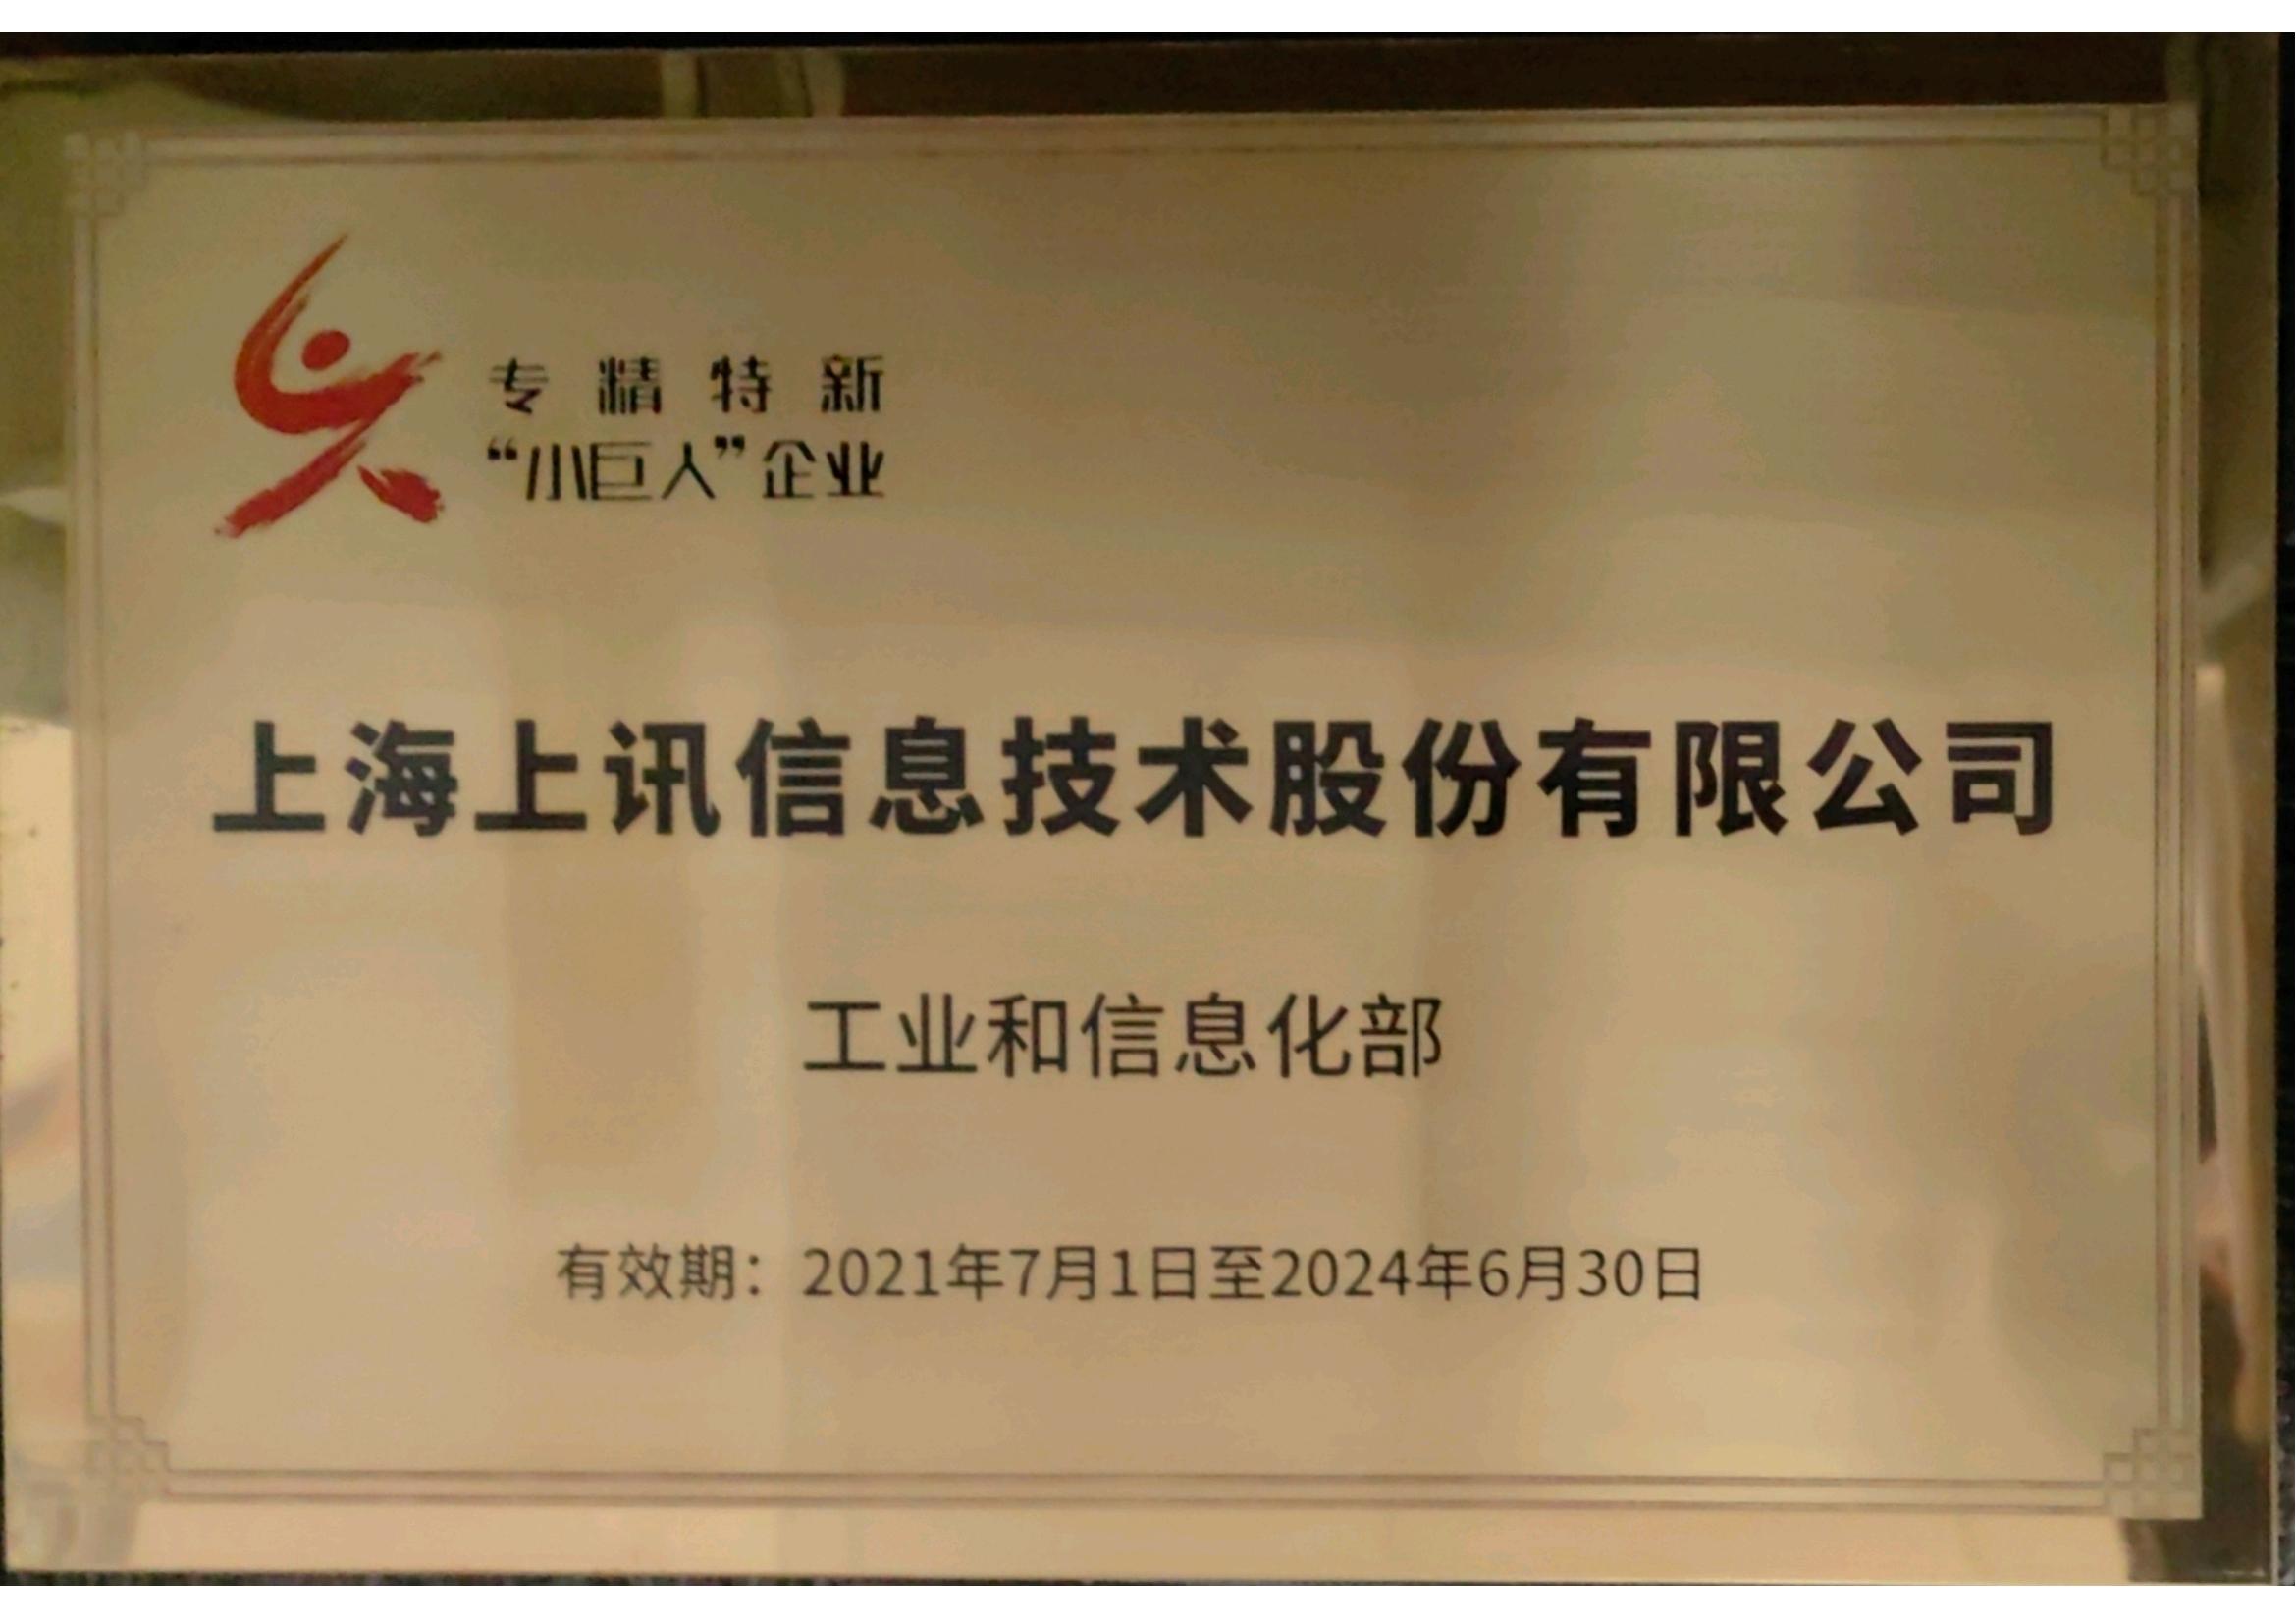 National-level Specialized and new "little giant" Enterprises 